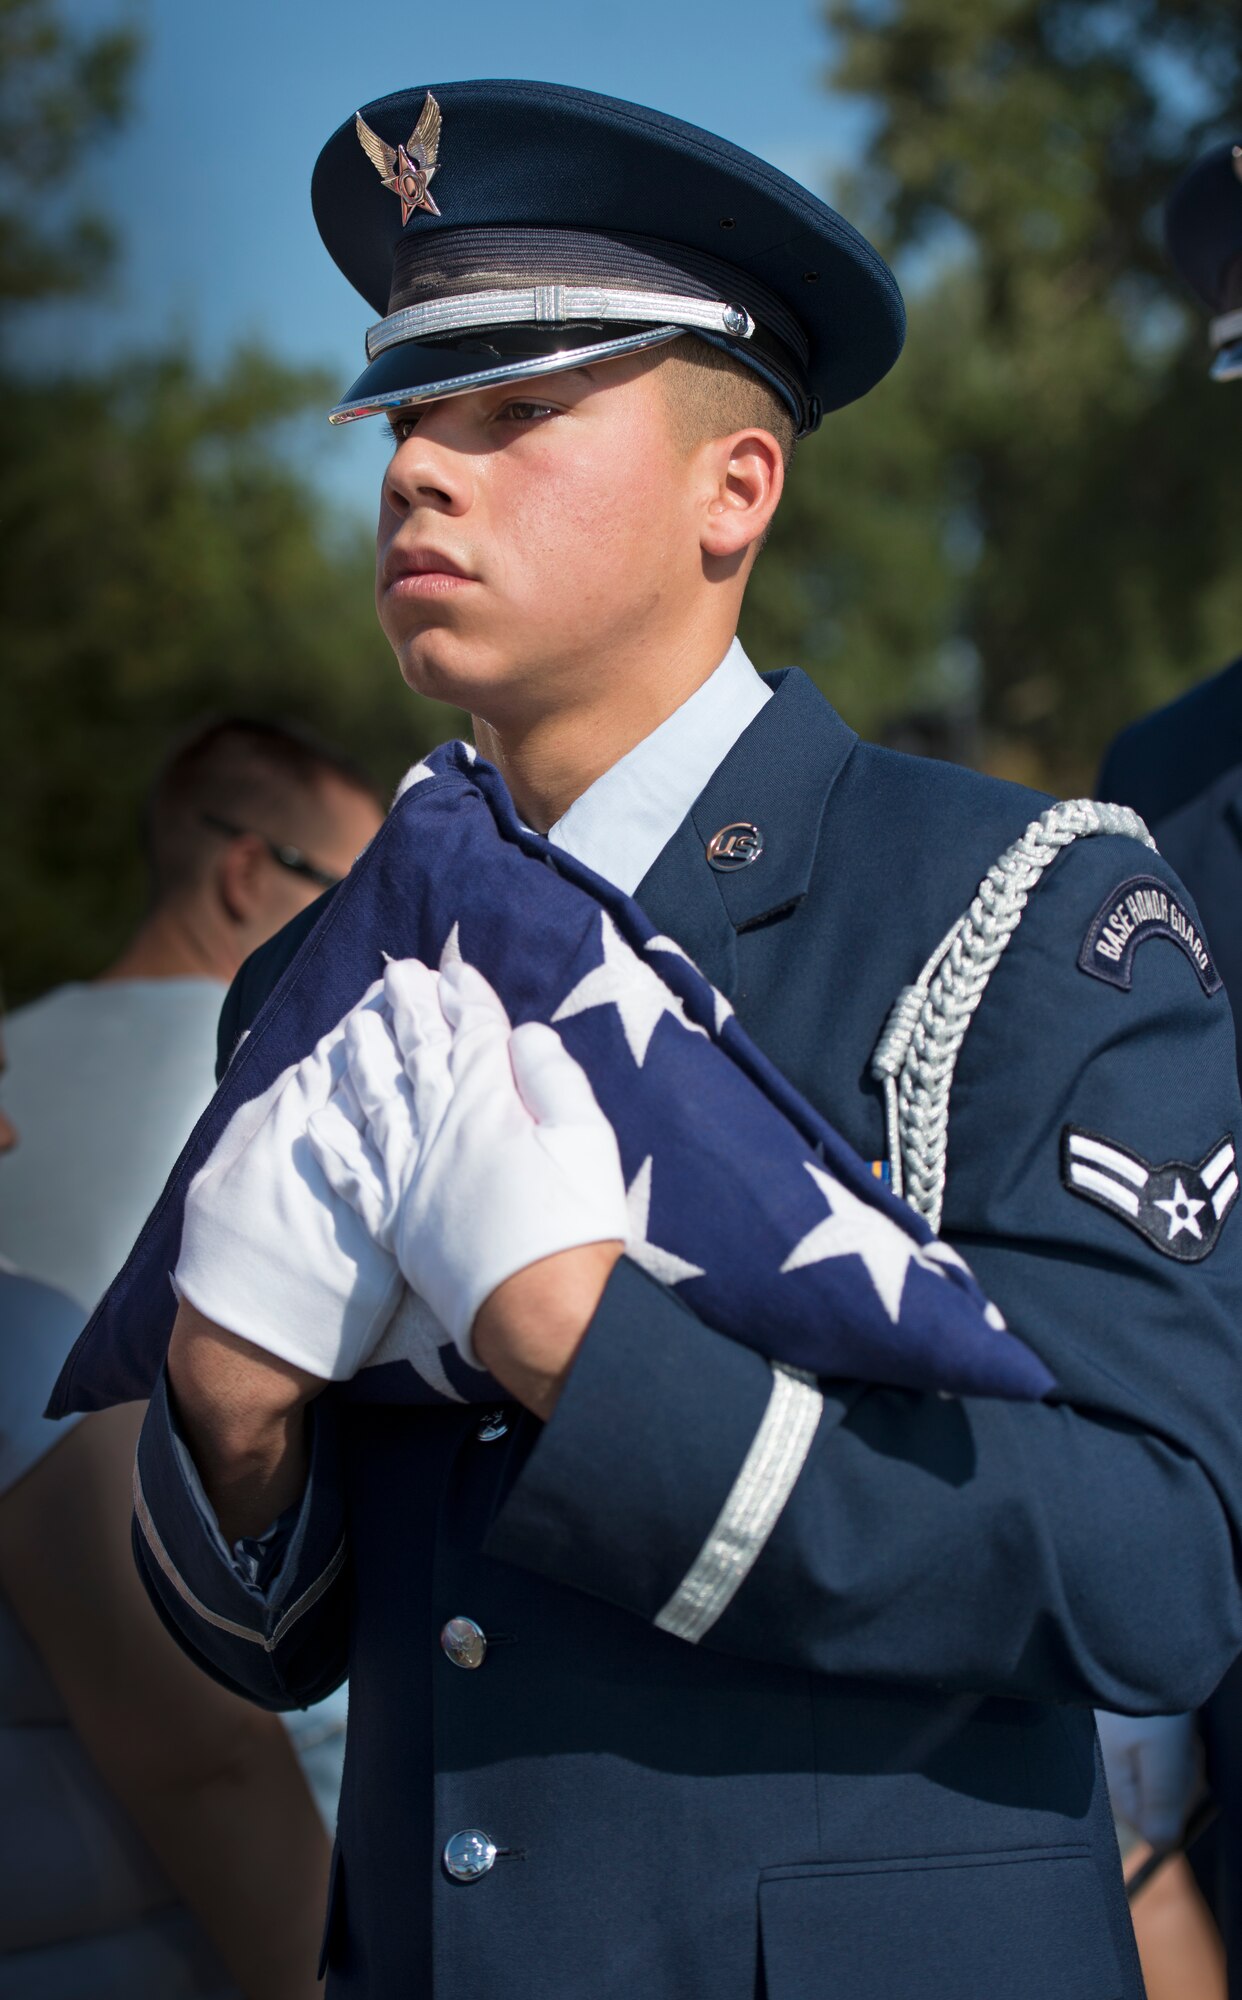 Airman 1st Class Gabriel Hurtado, 60th Aerial Port Squadron, carries a folded American Flag during a Freedom Walk Sept. 11, 2014, at Travis Air Force Base, Calif. (U.S. Air Force photo by Heide Couch)